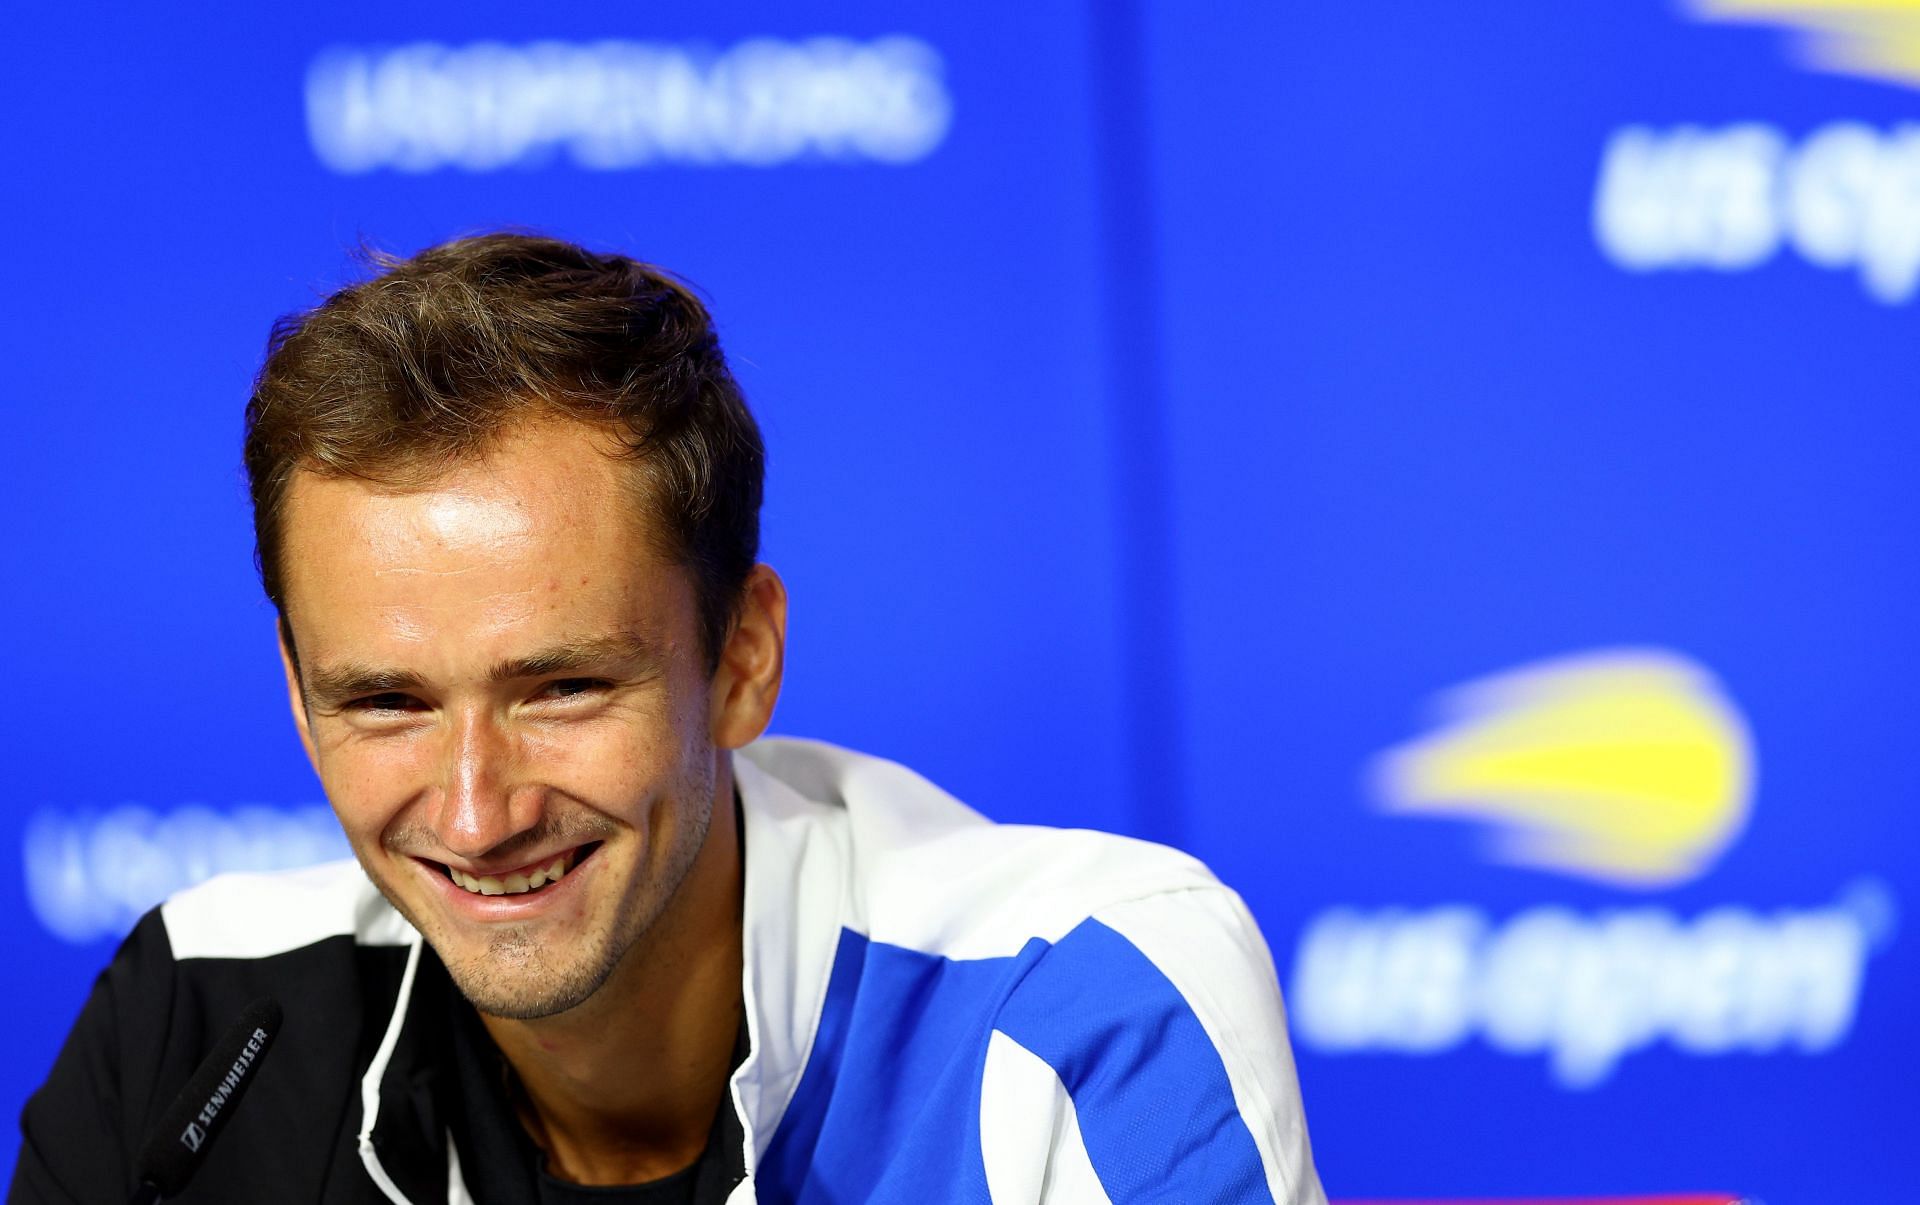 Daniil Medvedev during his pre-tournament press conference at the 2022 US Open.